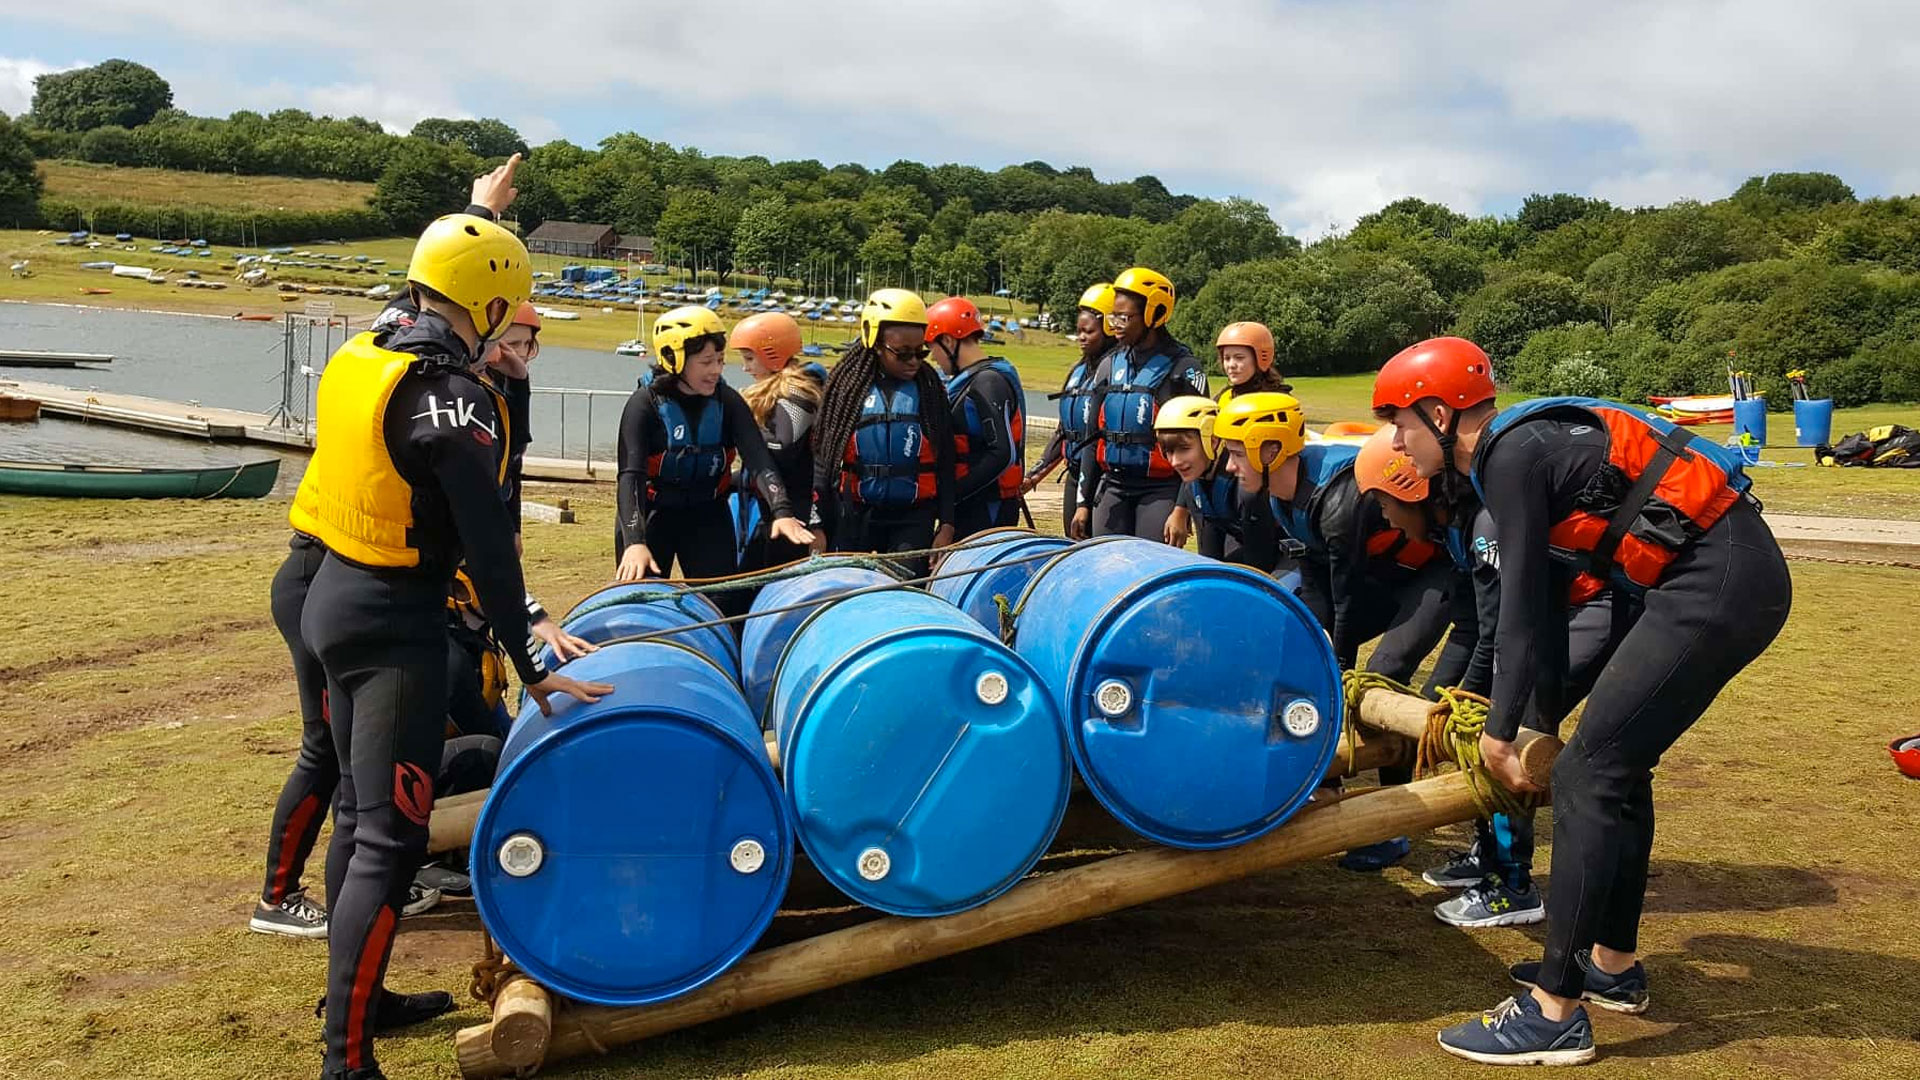 Action4Youth’s summer NCS programme takes young people on a journey they’ll never forget